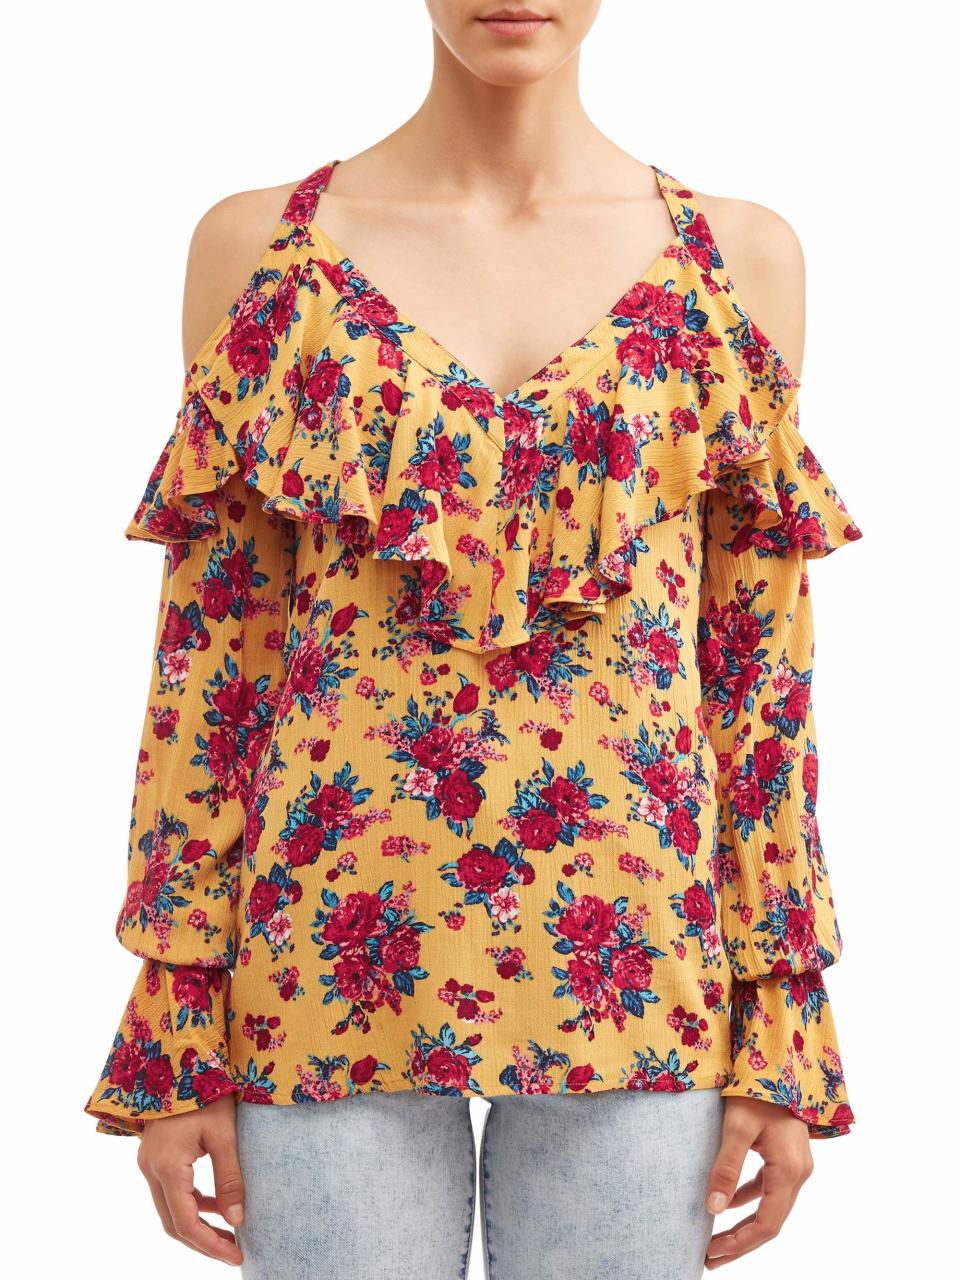 This stylish top is available in three colors. (Photo: Walmart)